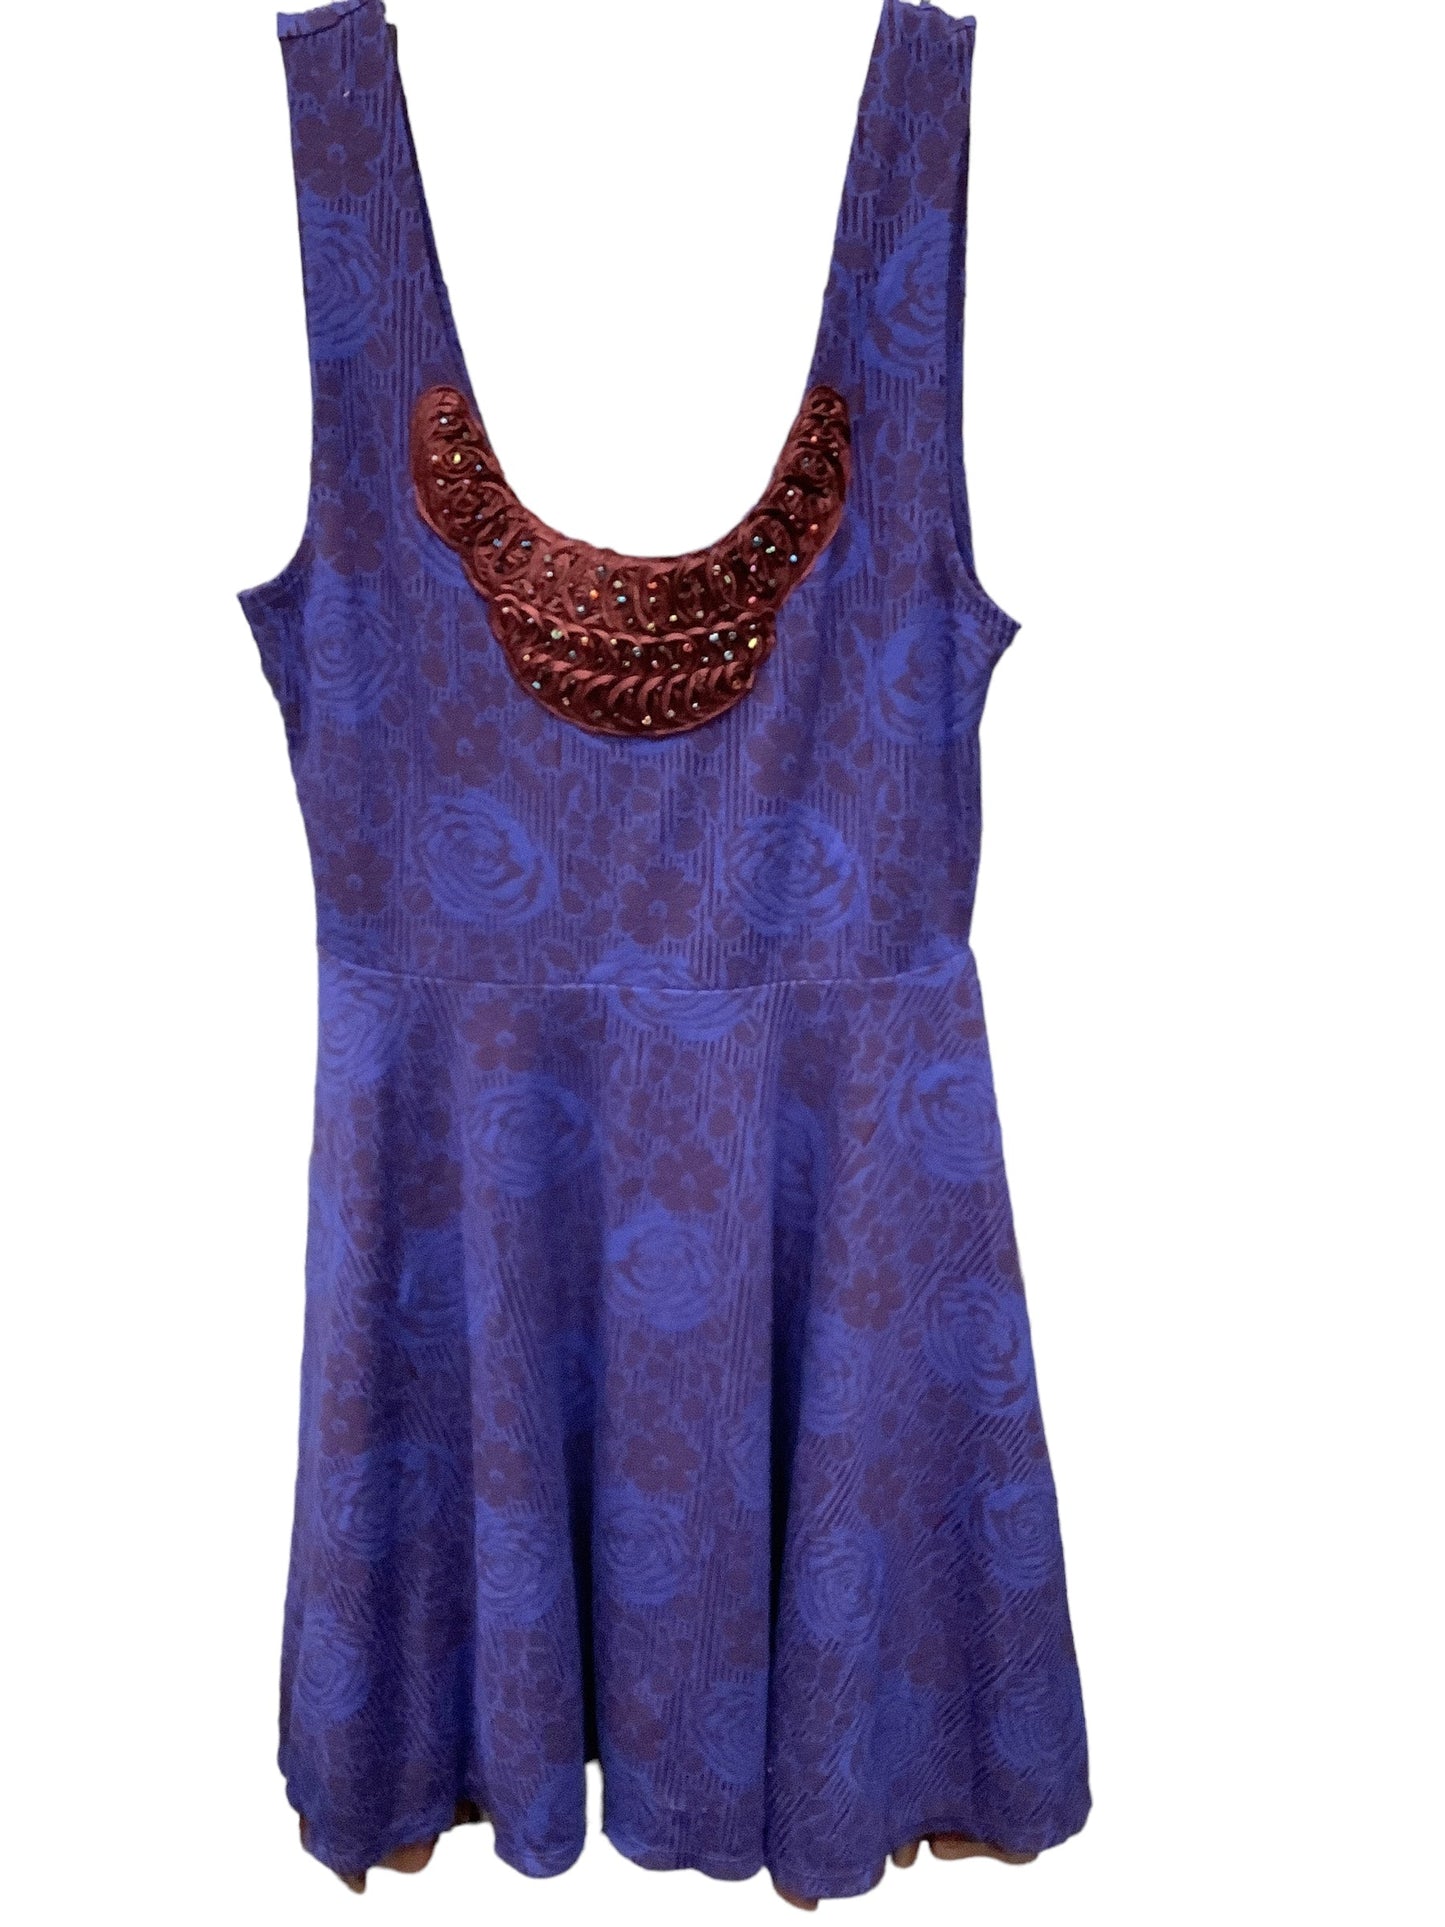 Blue Dress Casual Short Free People, Size M